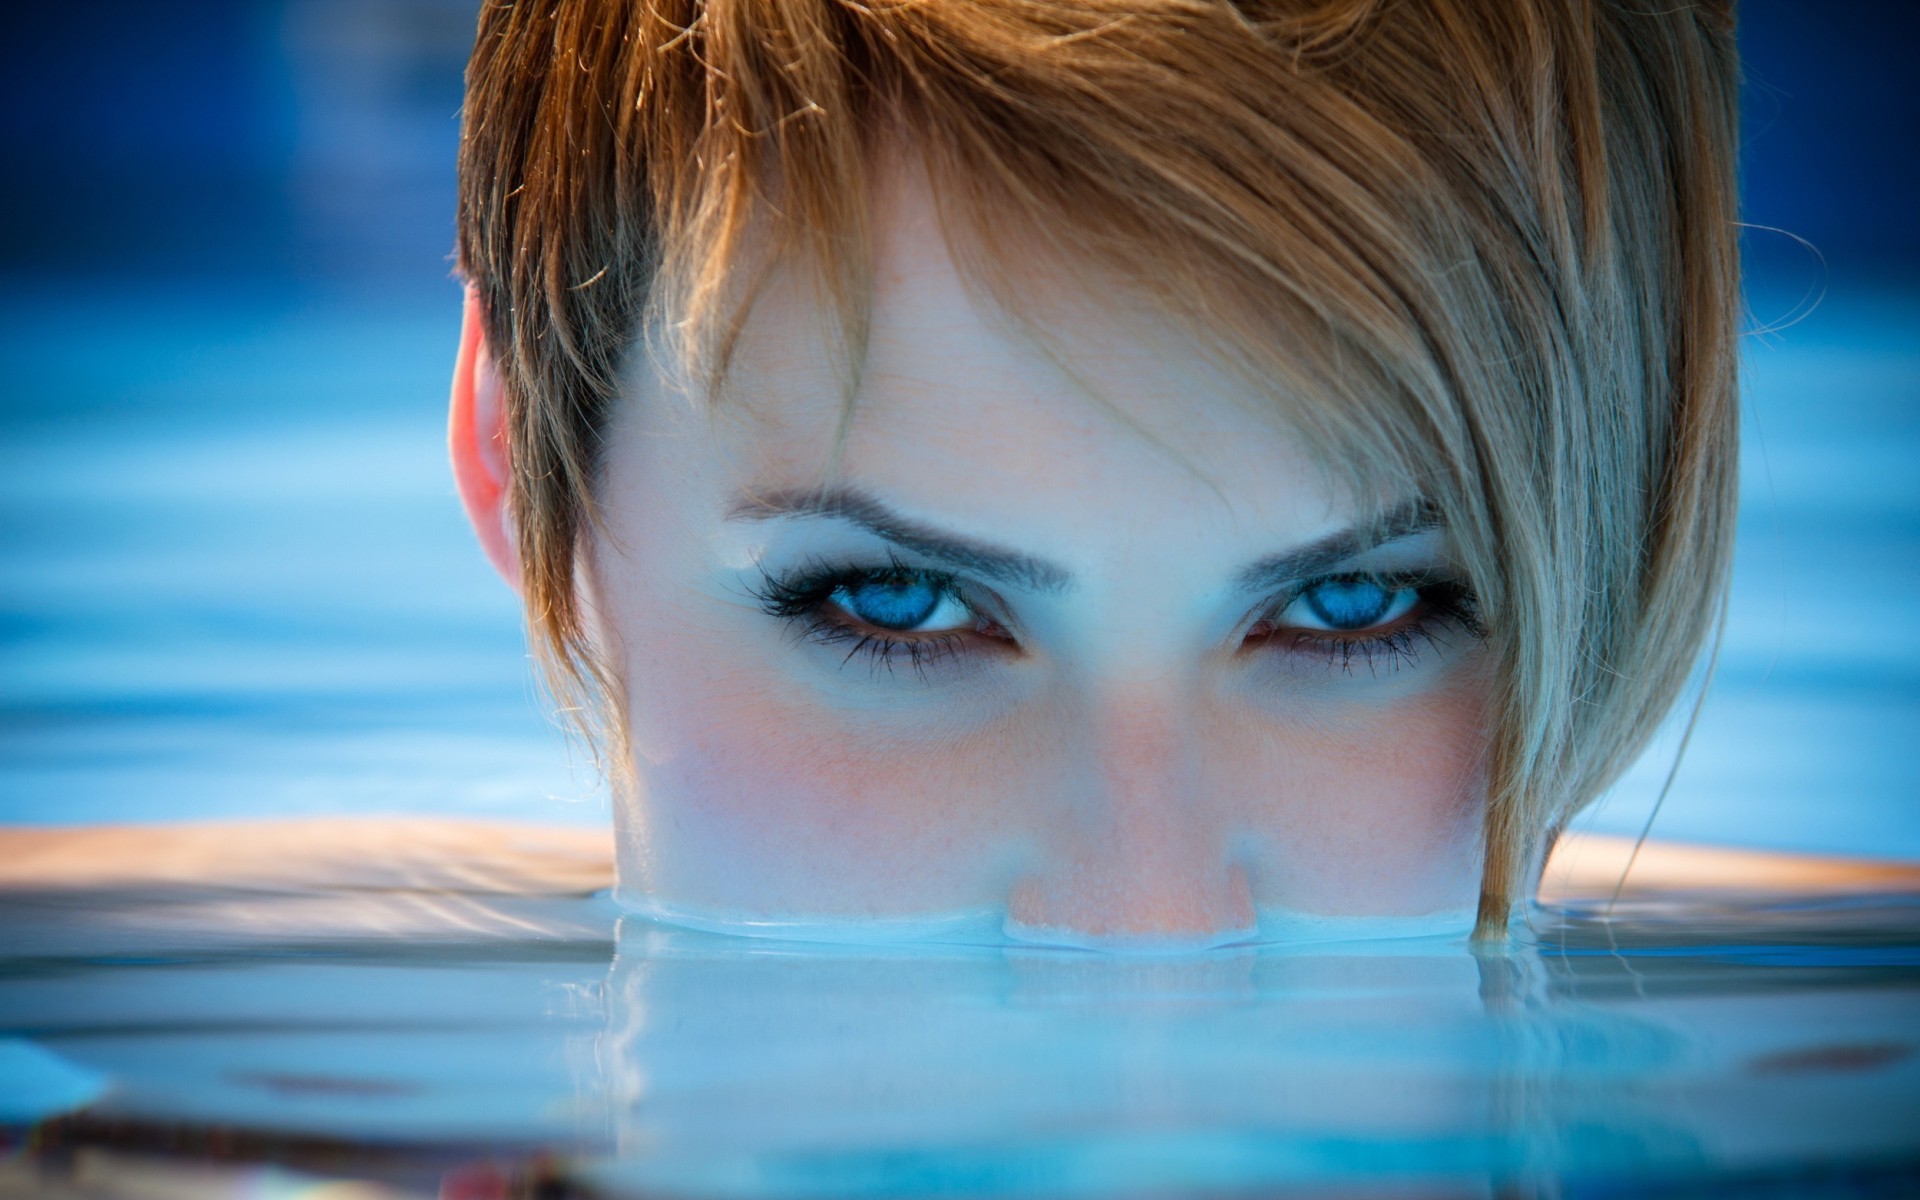 Blue hair swimming pool - YouTube - wide 3